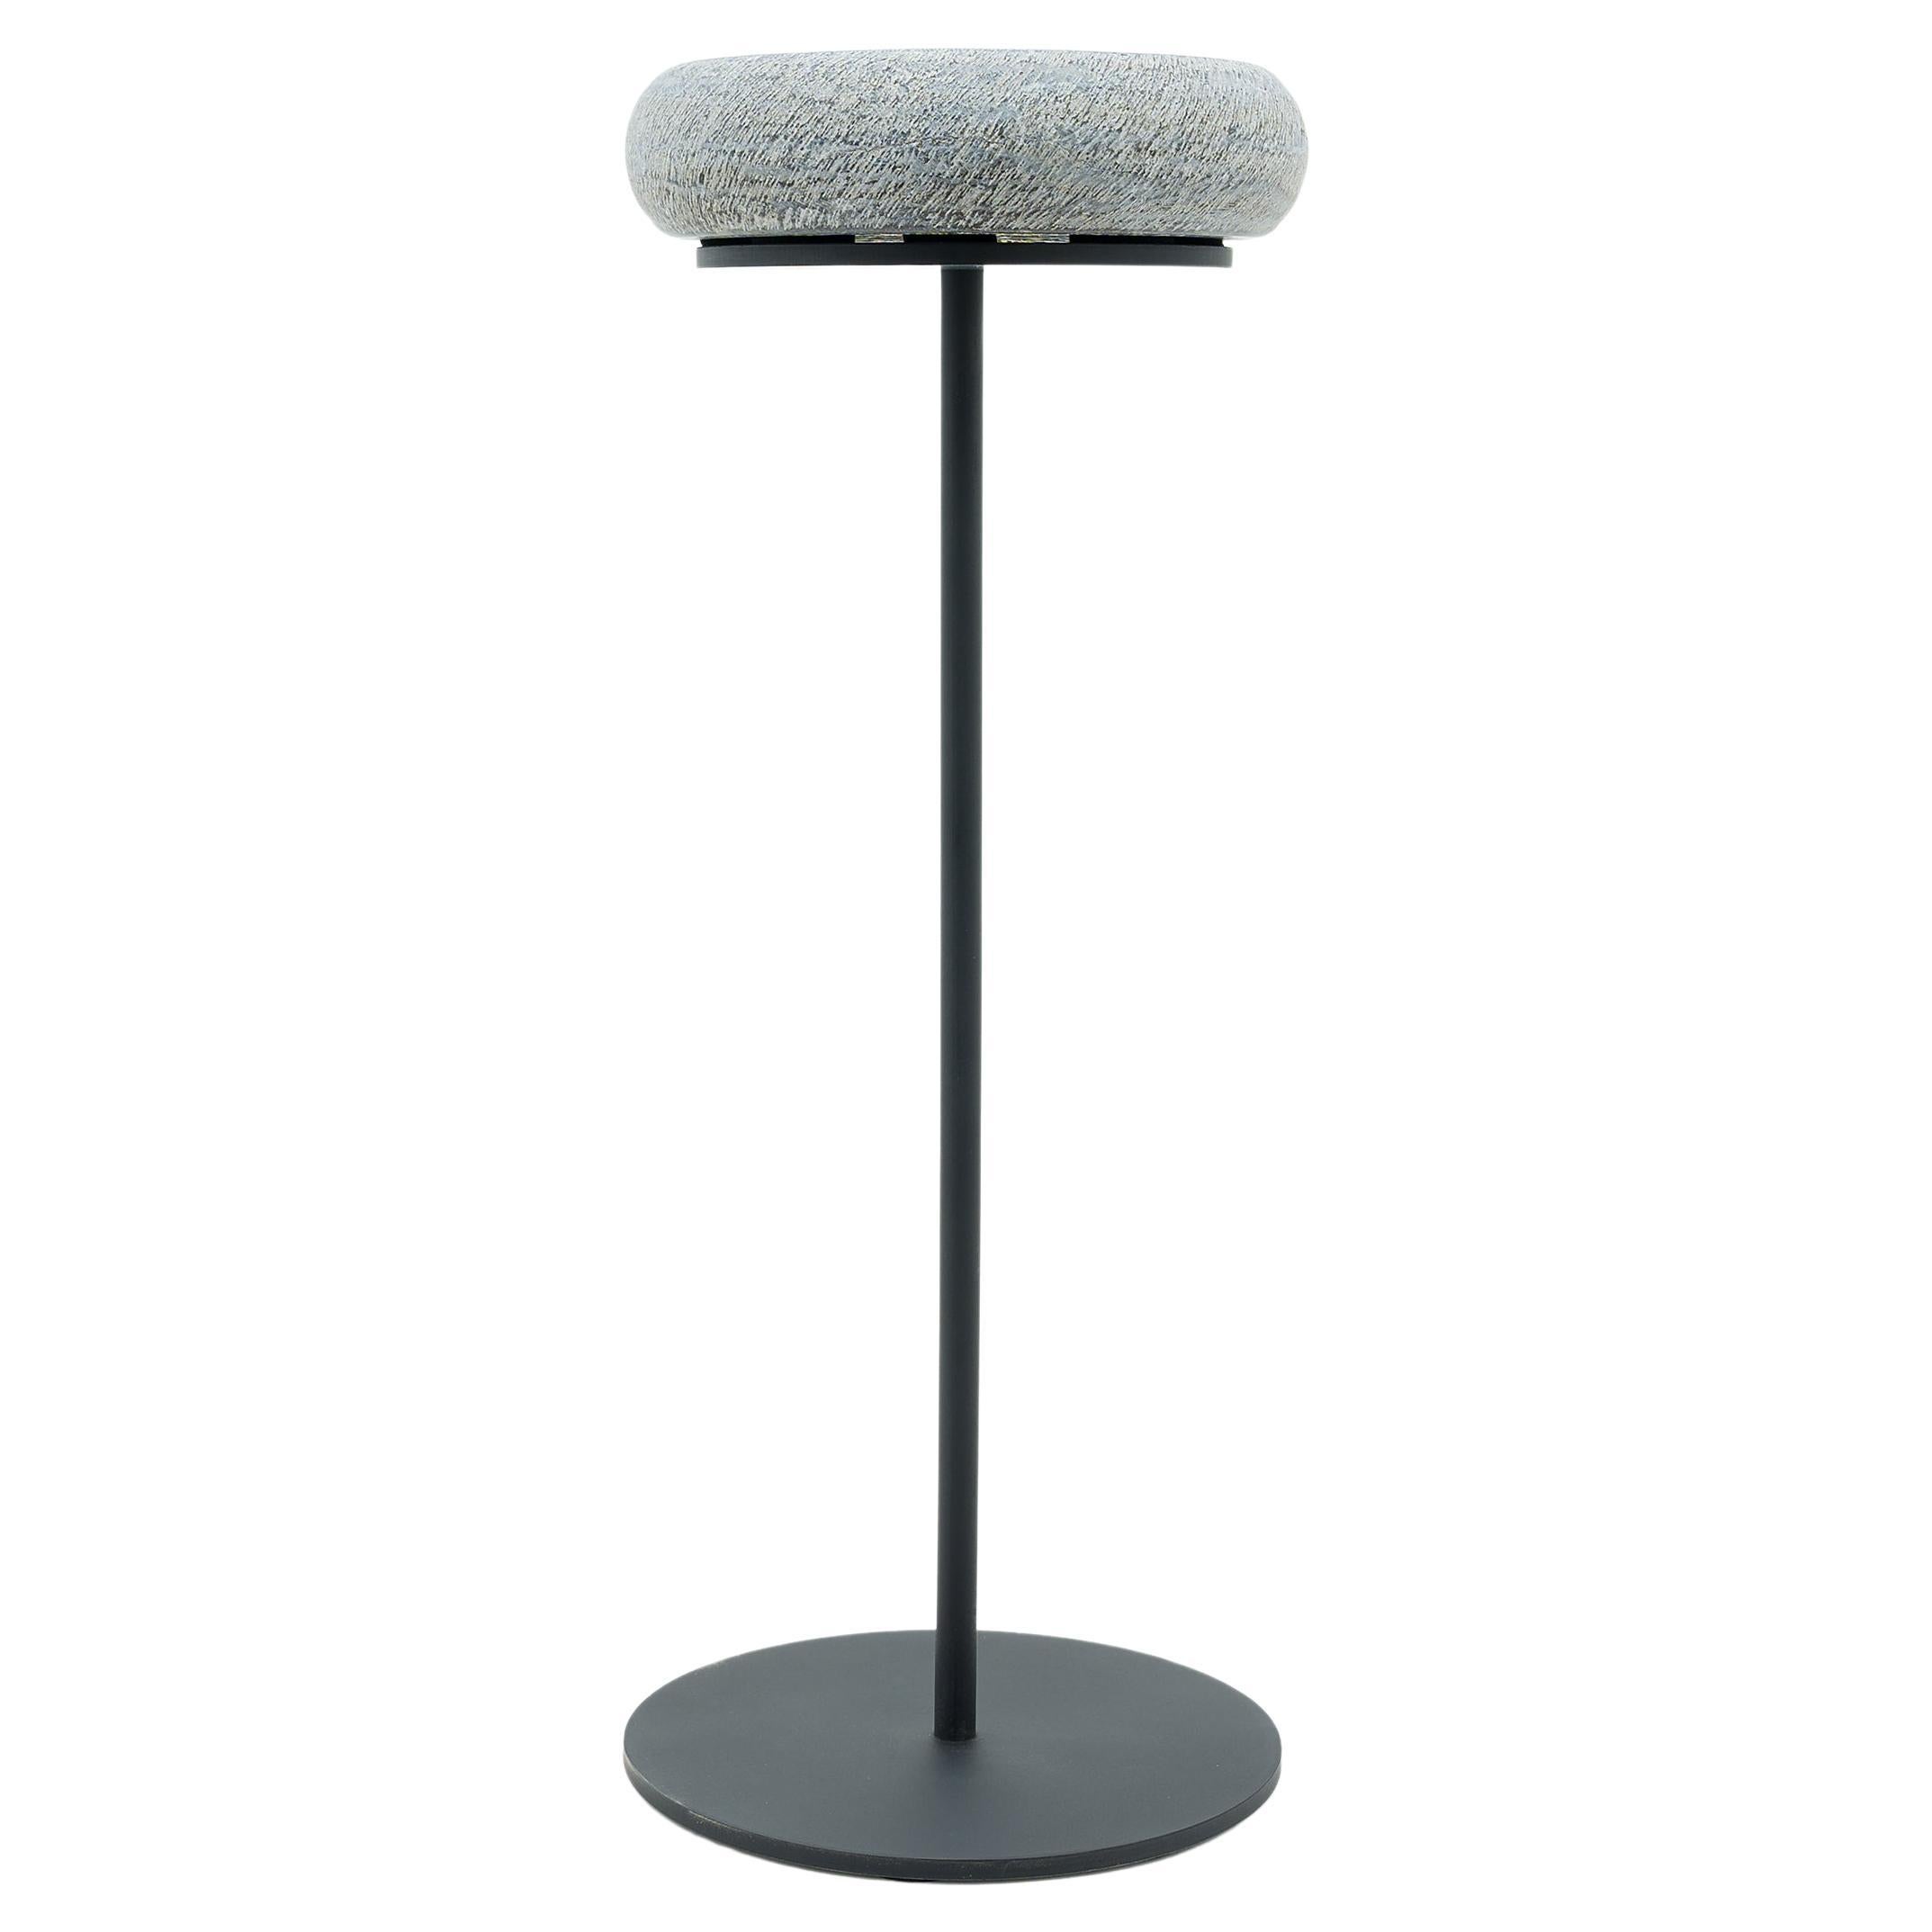 Petite table d'appoint Drum Stone